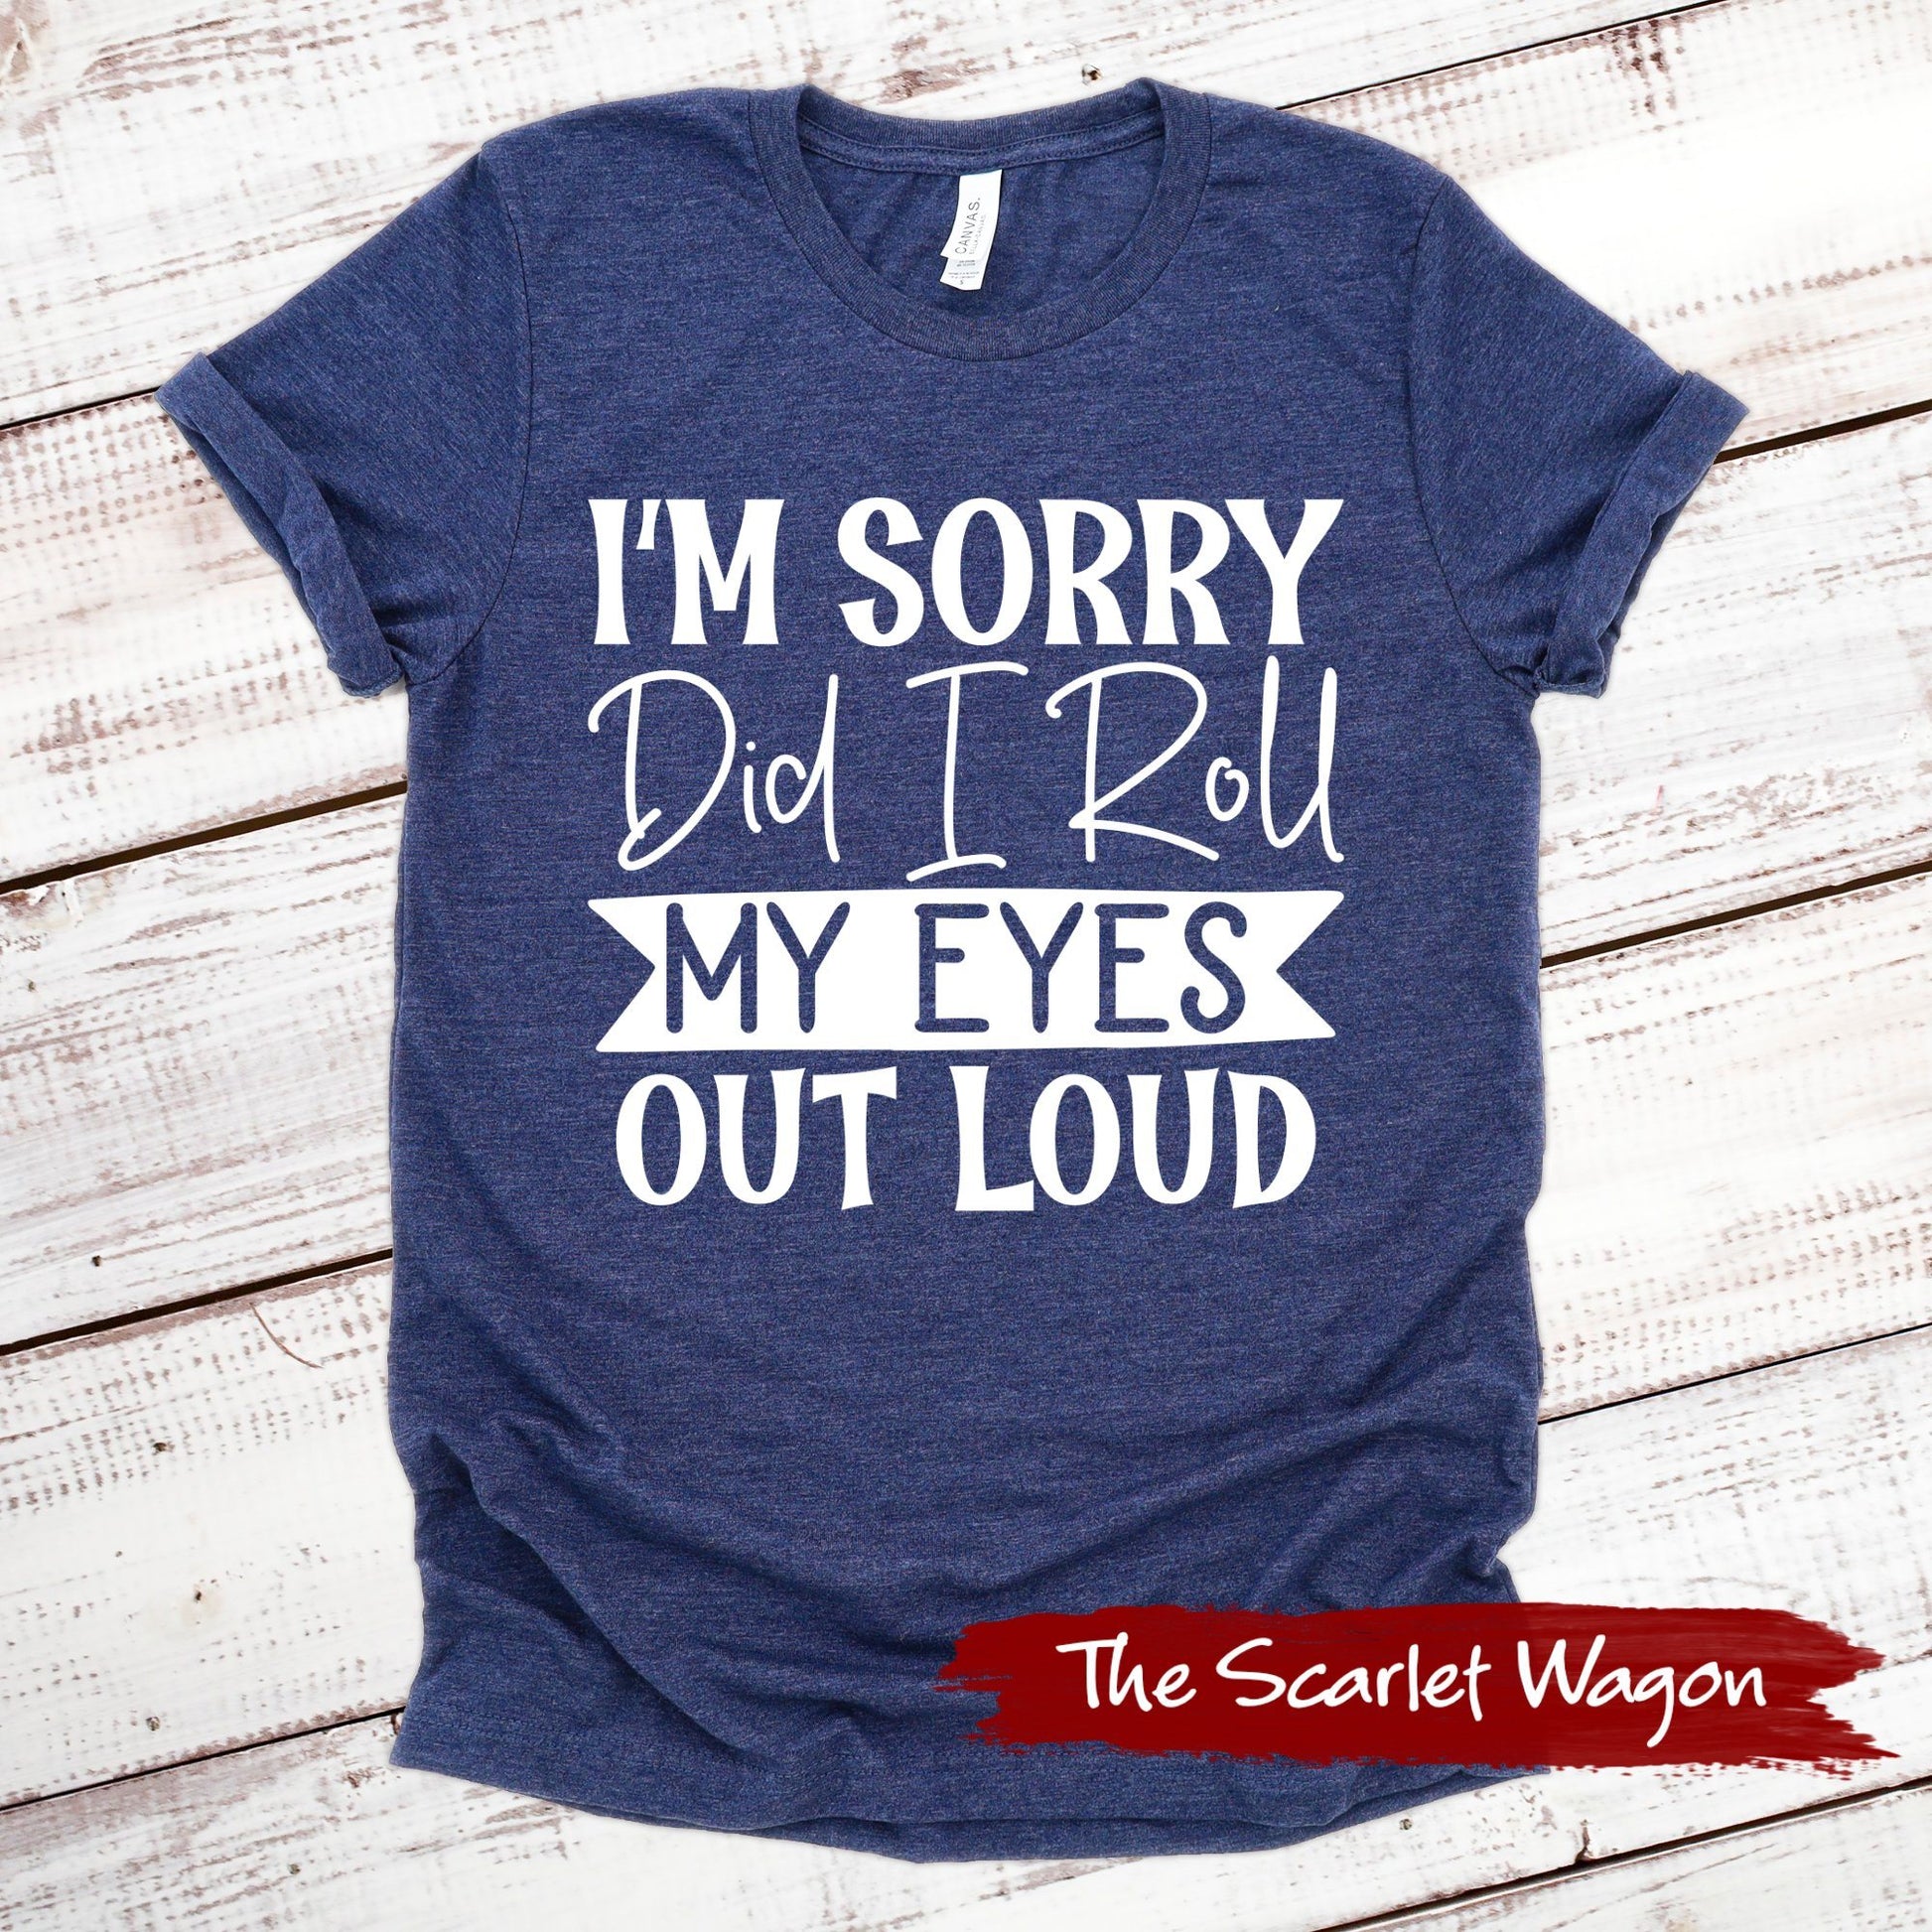 I'm Sorry Did I Roll My Eyes Out Loud Funny Shirt Scarlet Wagon Heather Navy XS 